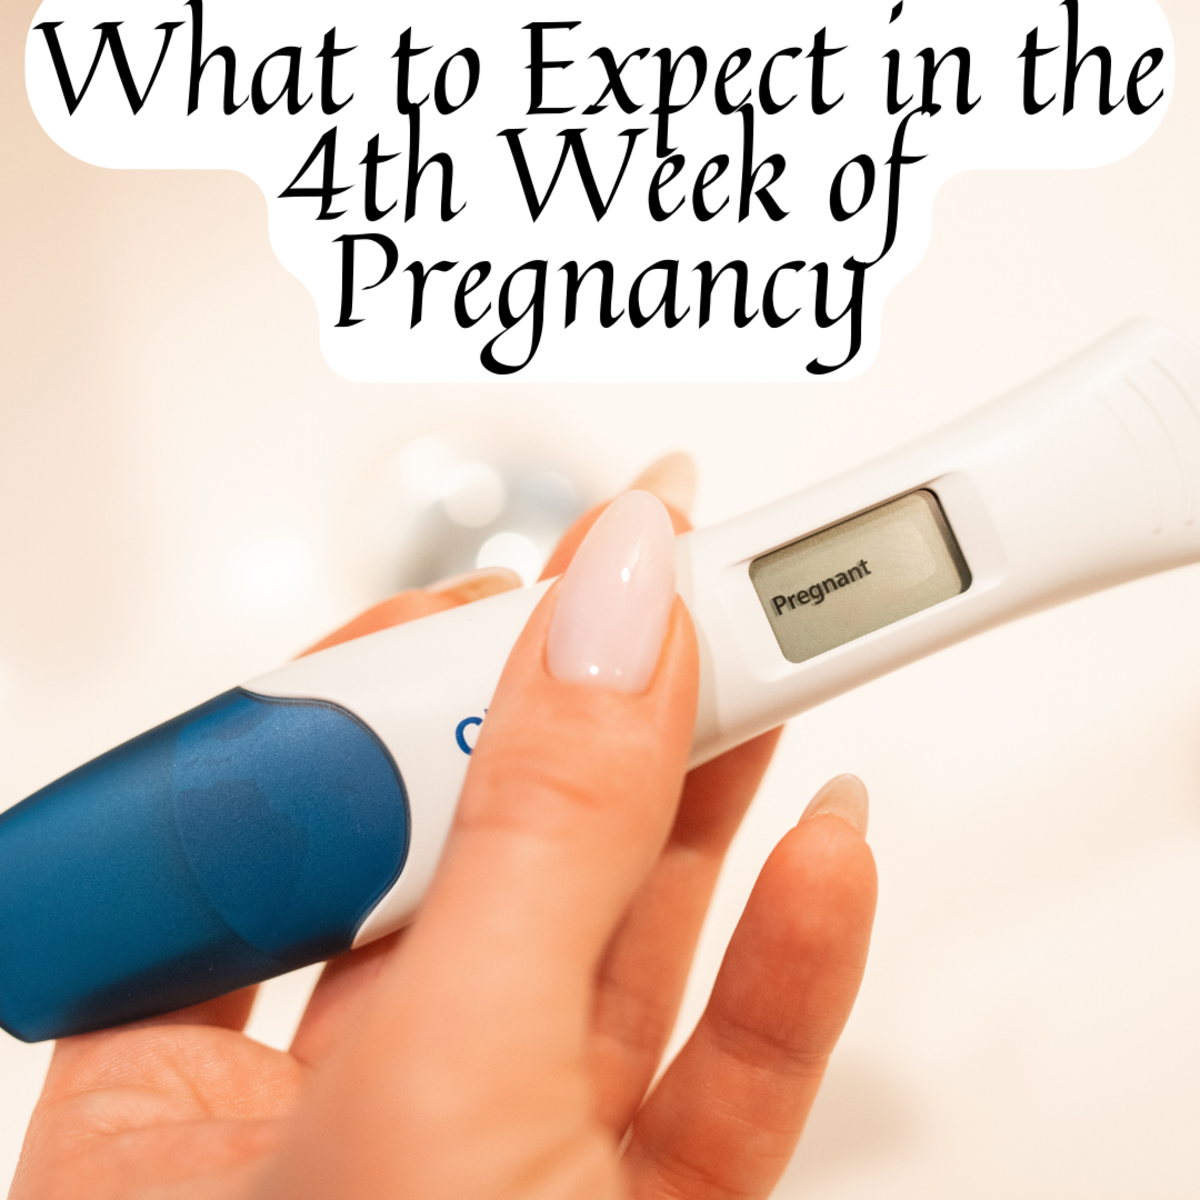 What to Expect in the 4th Week of Pregnancy